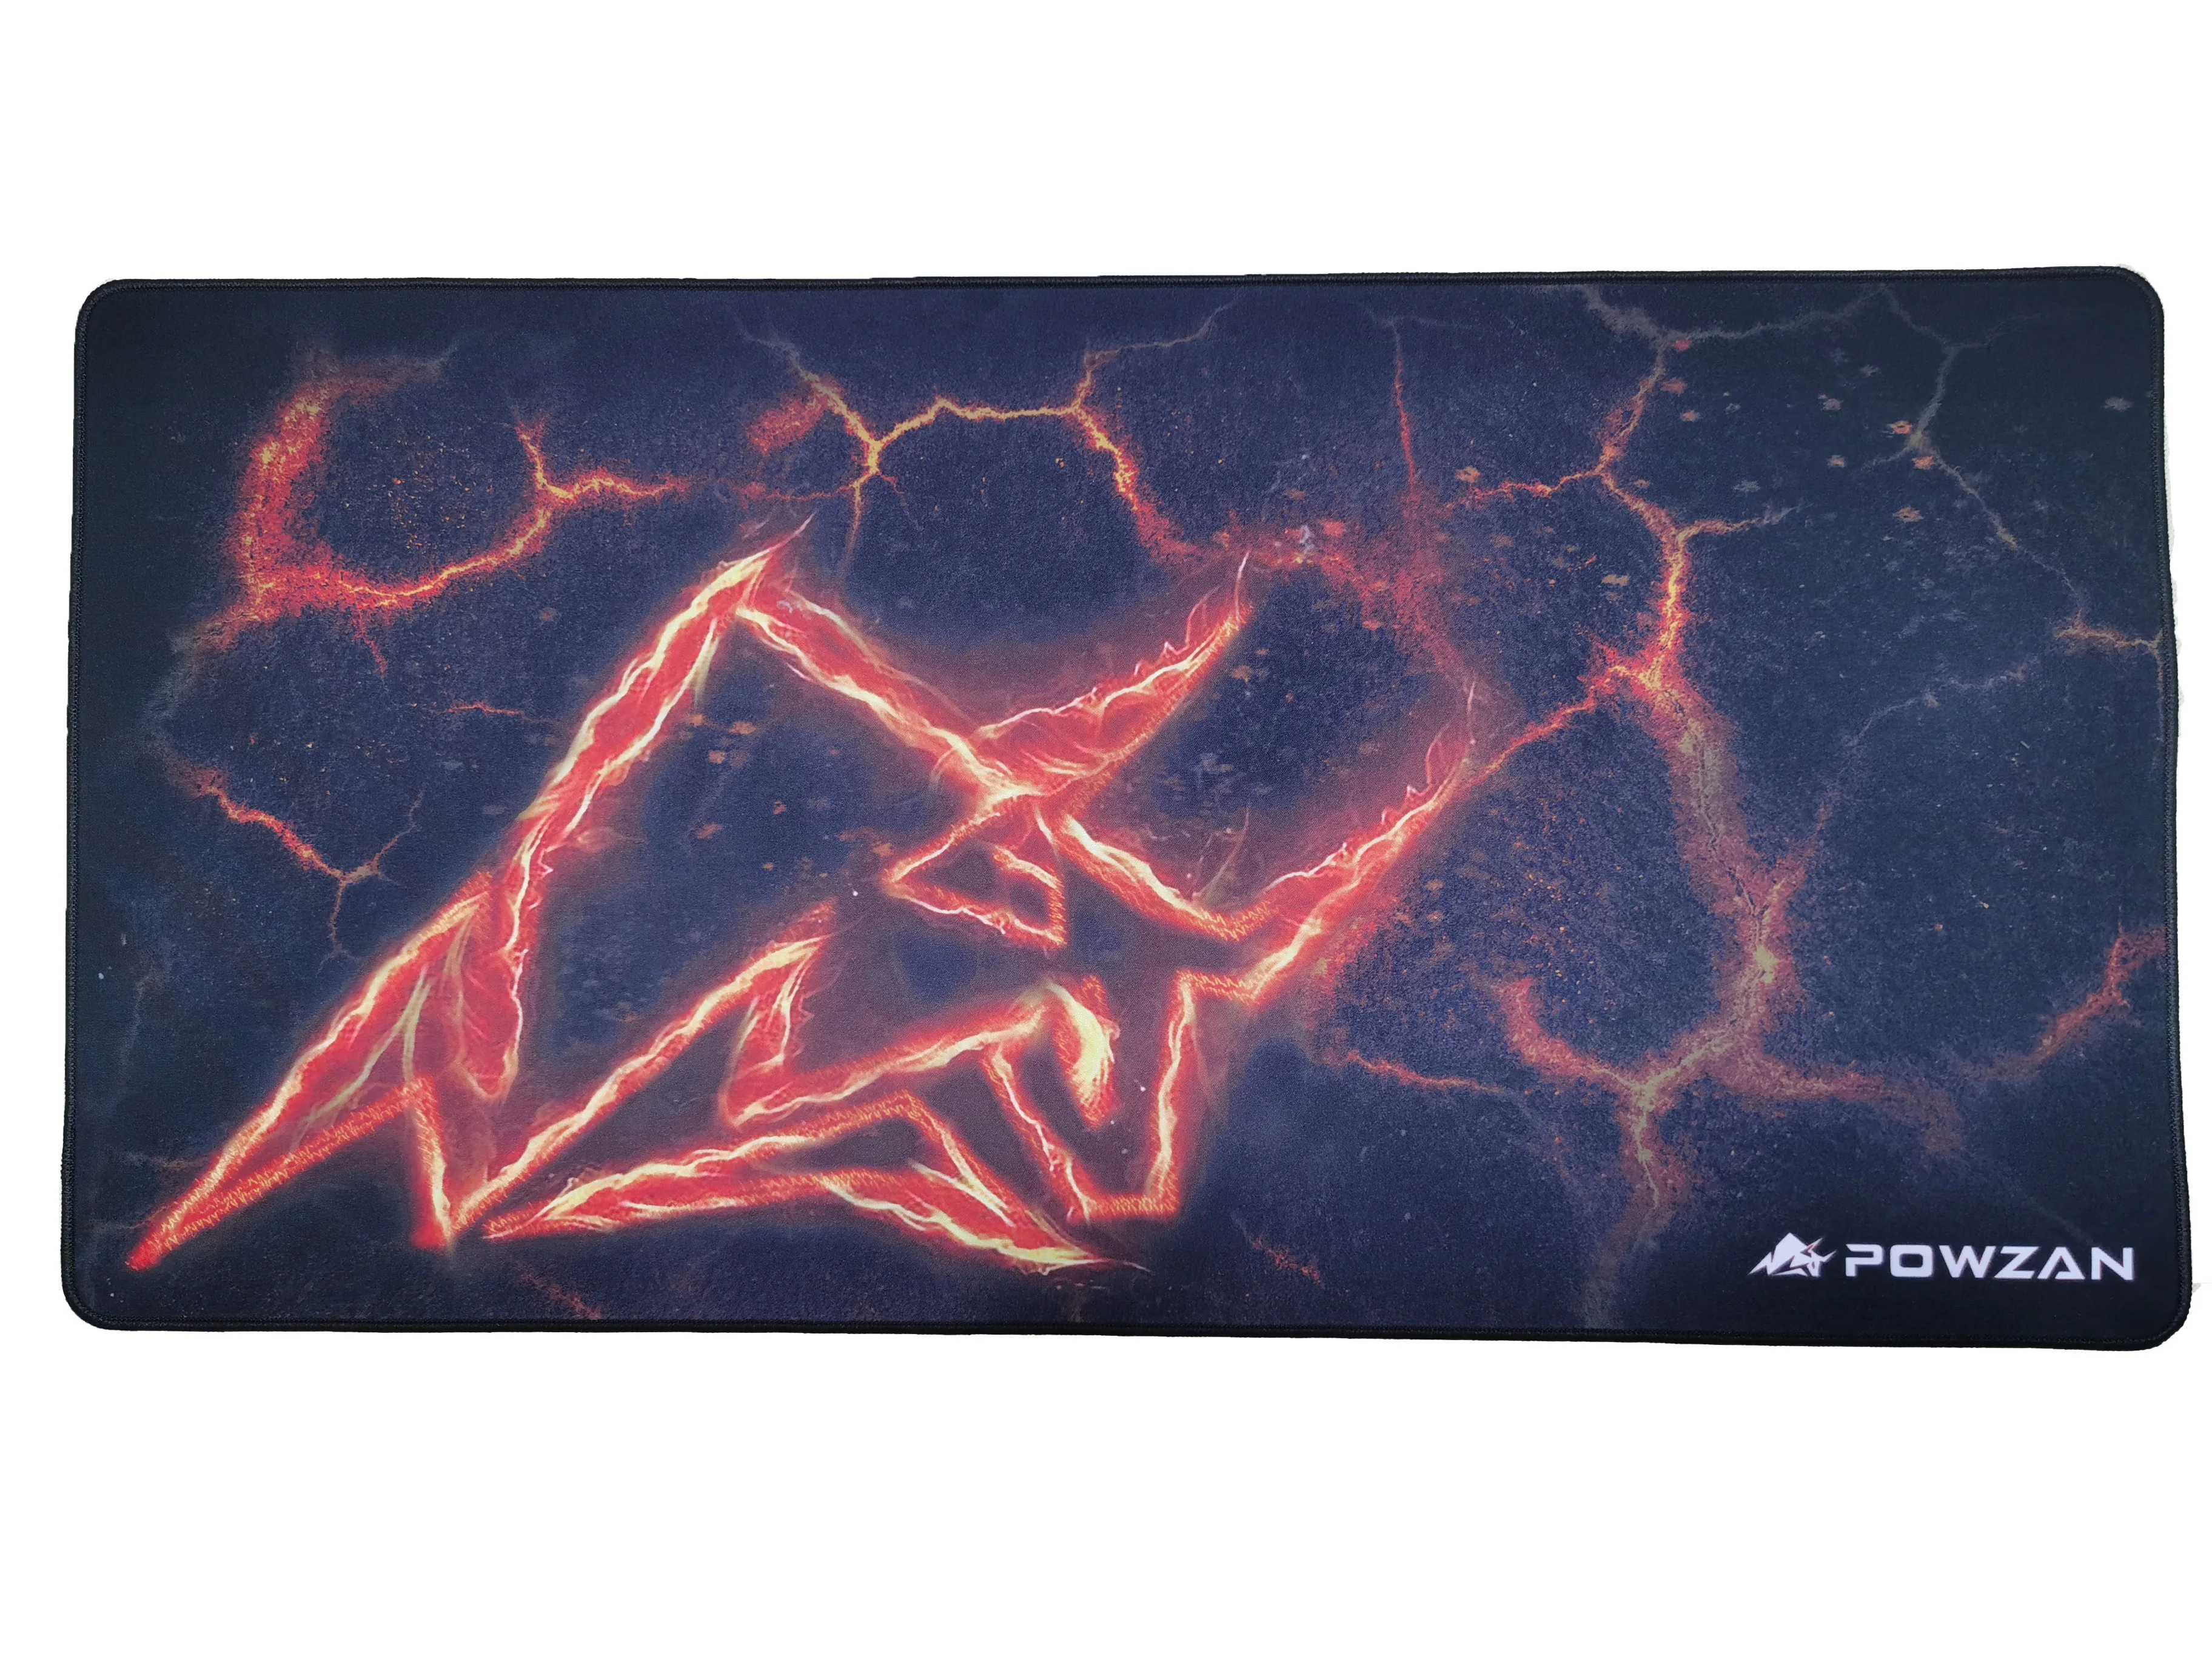 product-Zodiac Ox of Red Bull mouse pad natural rubber mousepad high quality gaming mouse pad-Tigerw